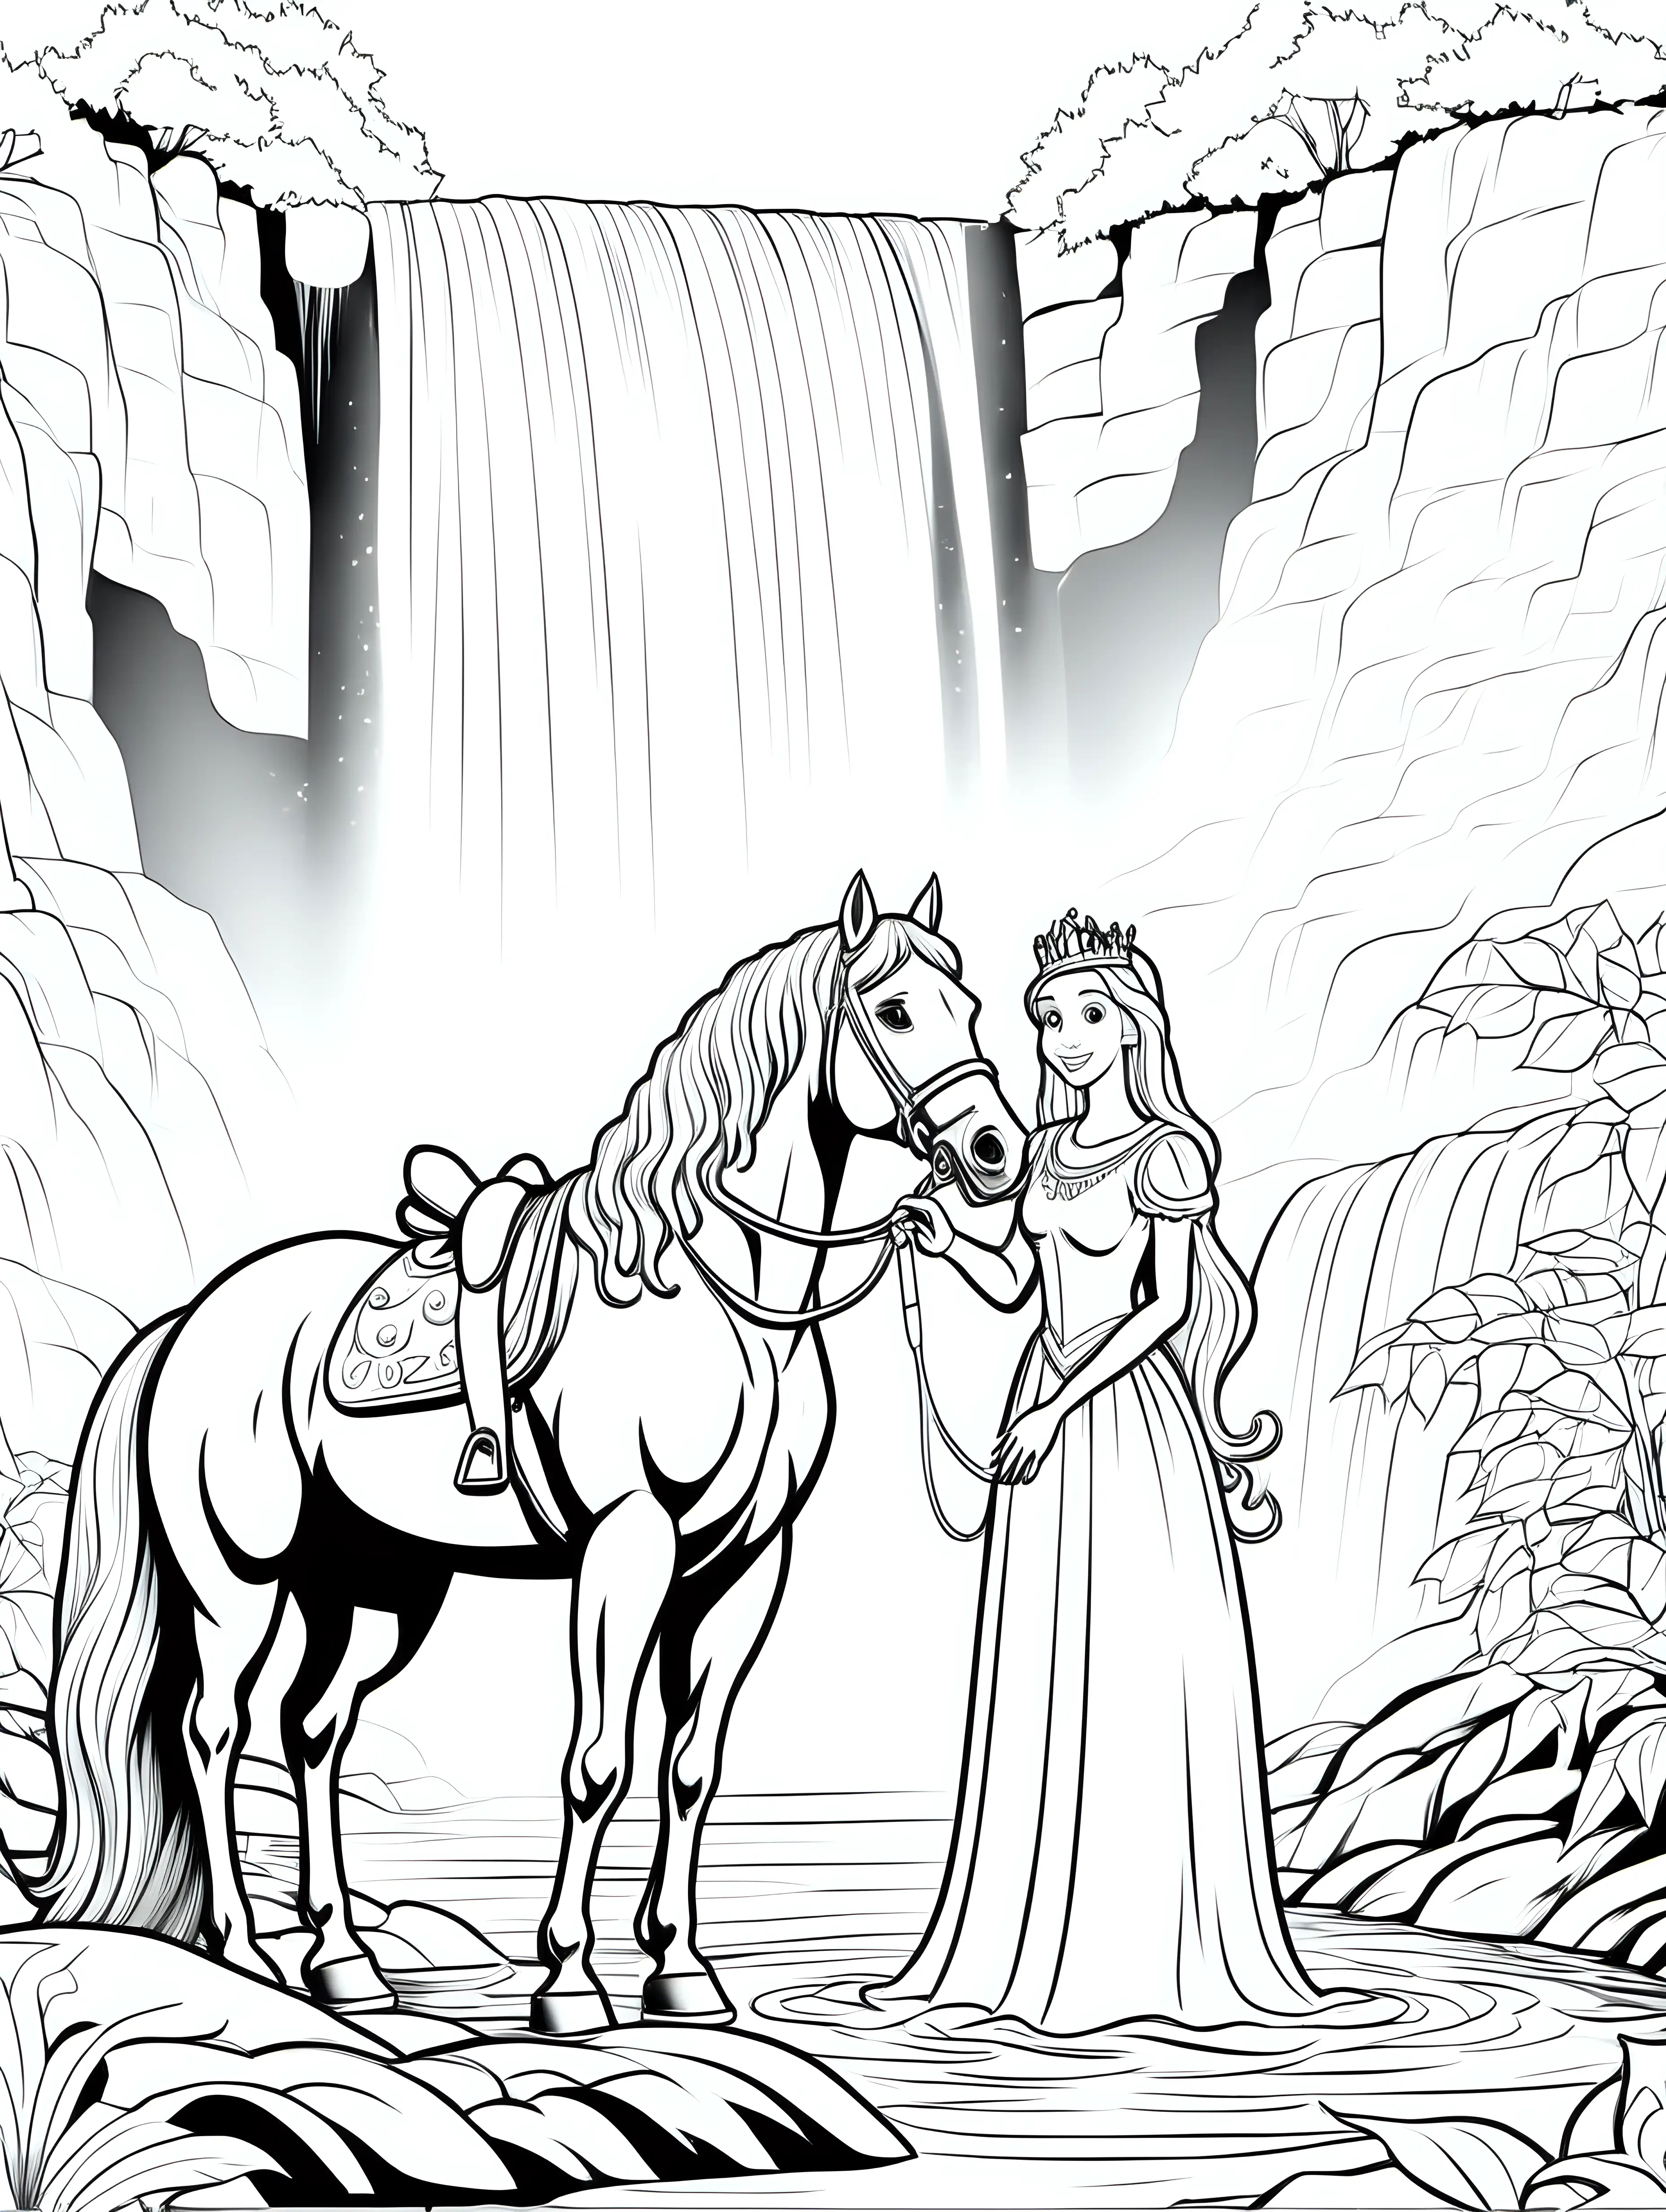 Princess and Horse by Waterfall Coloring Page for Kids